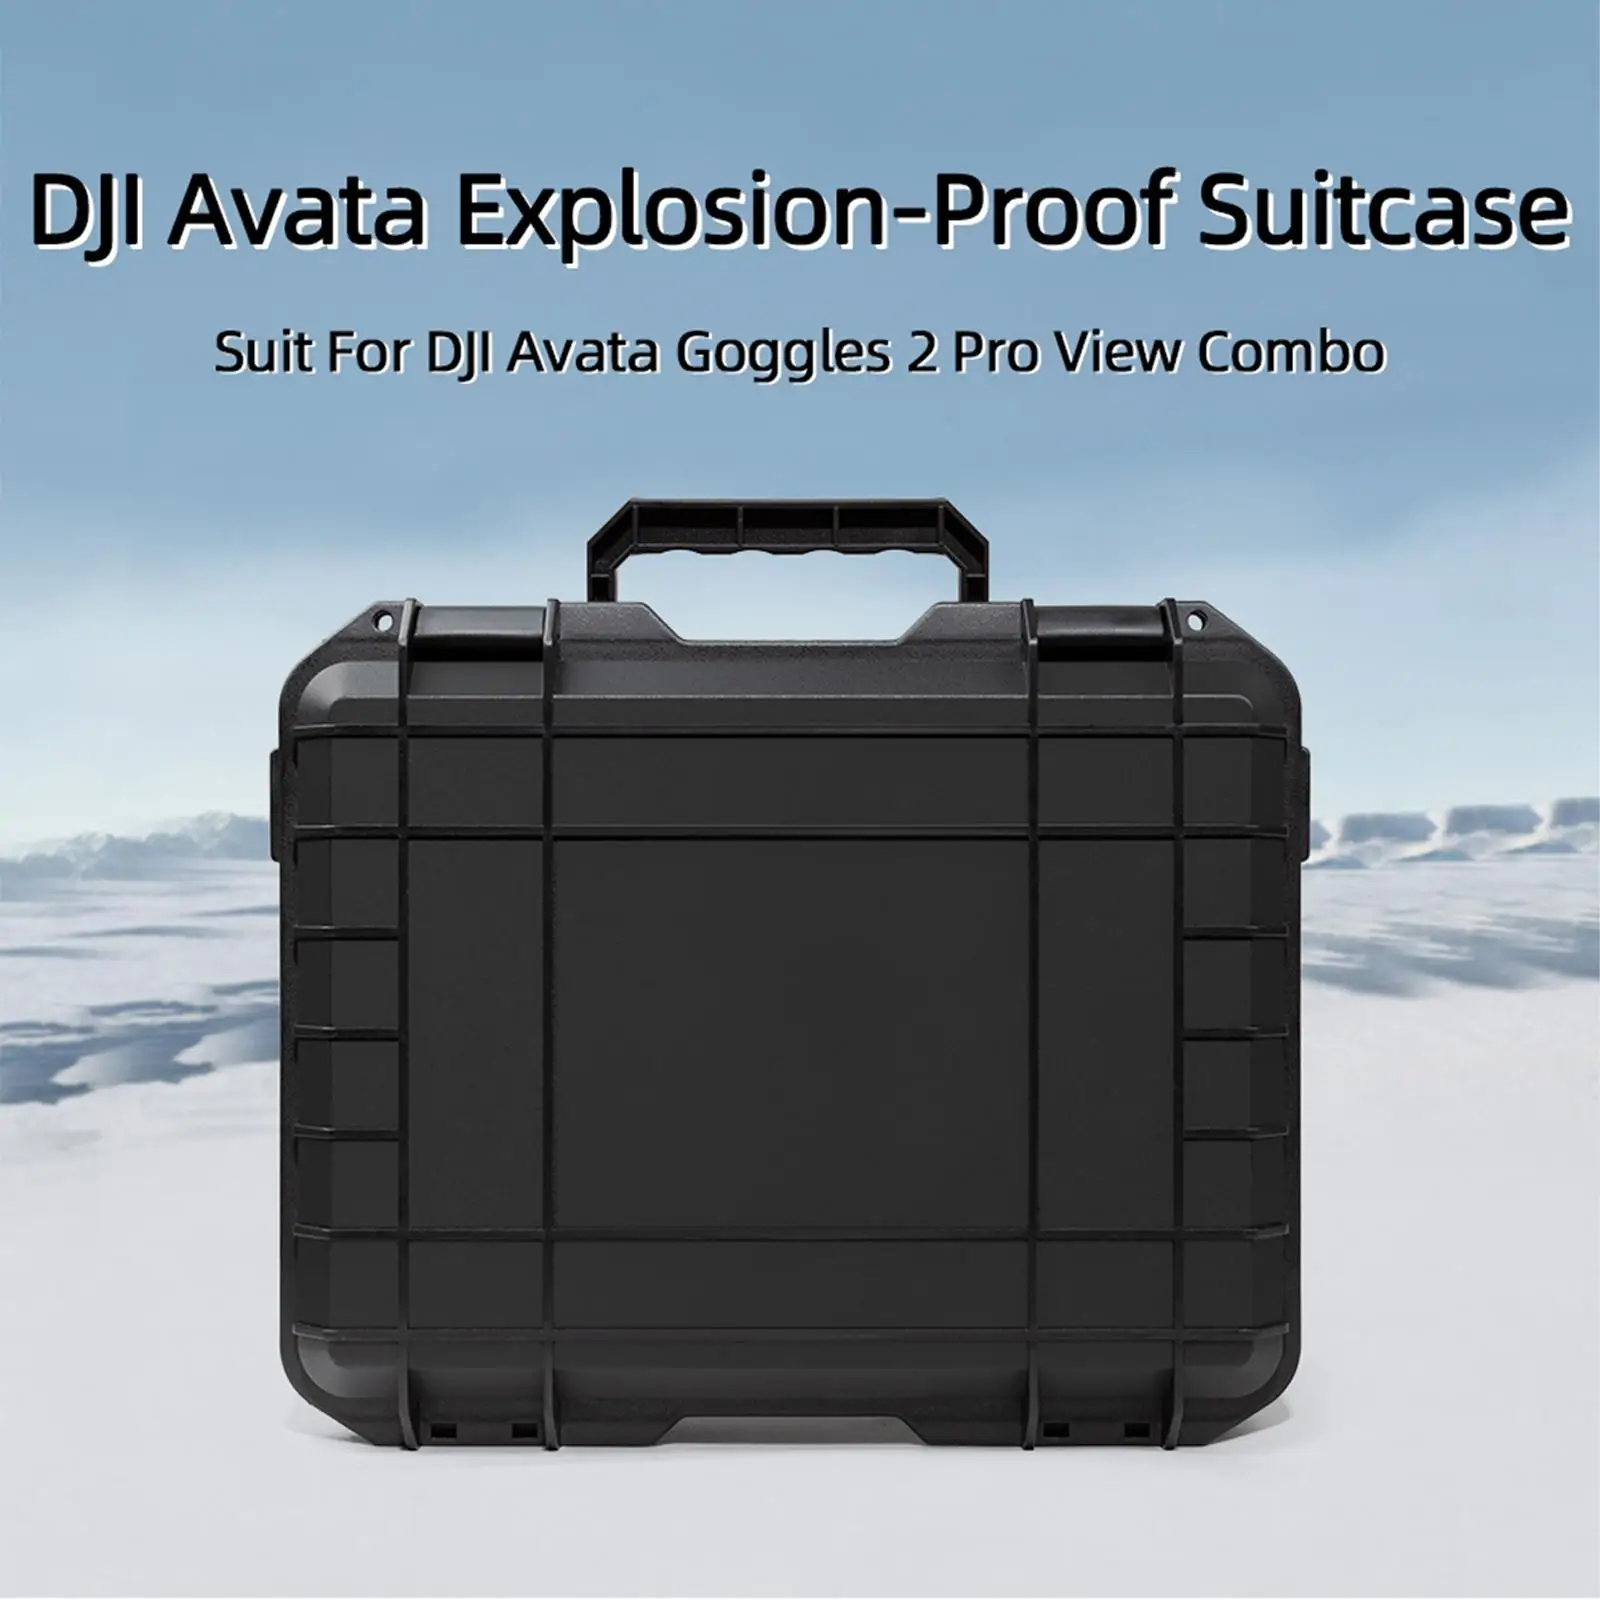 Storage Case Waterproof Professional Pressure Resistant Protective Standard Bag view Combo Smart Controller Drone